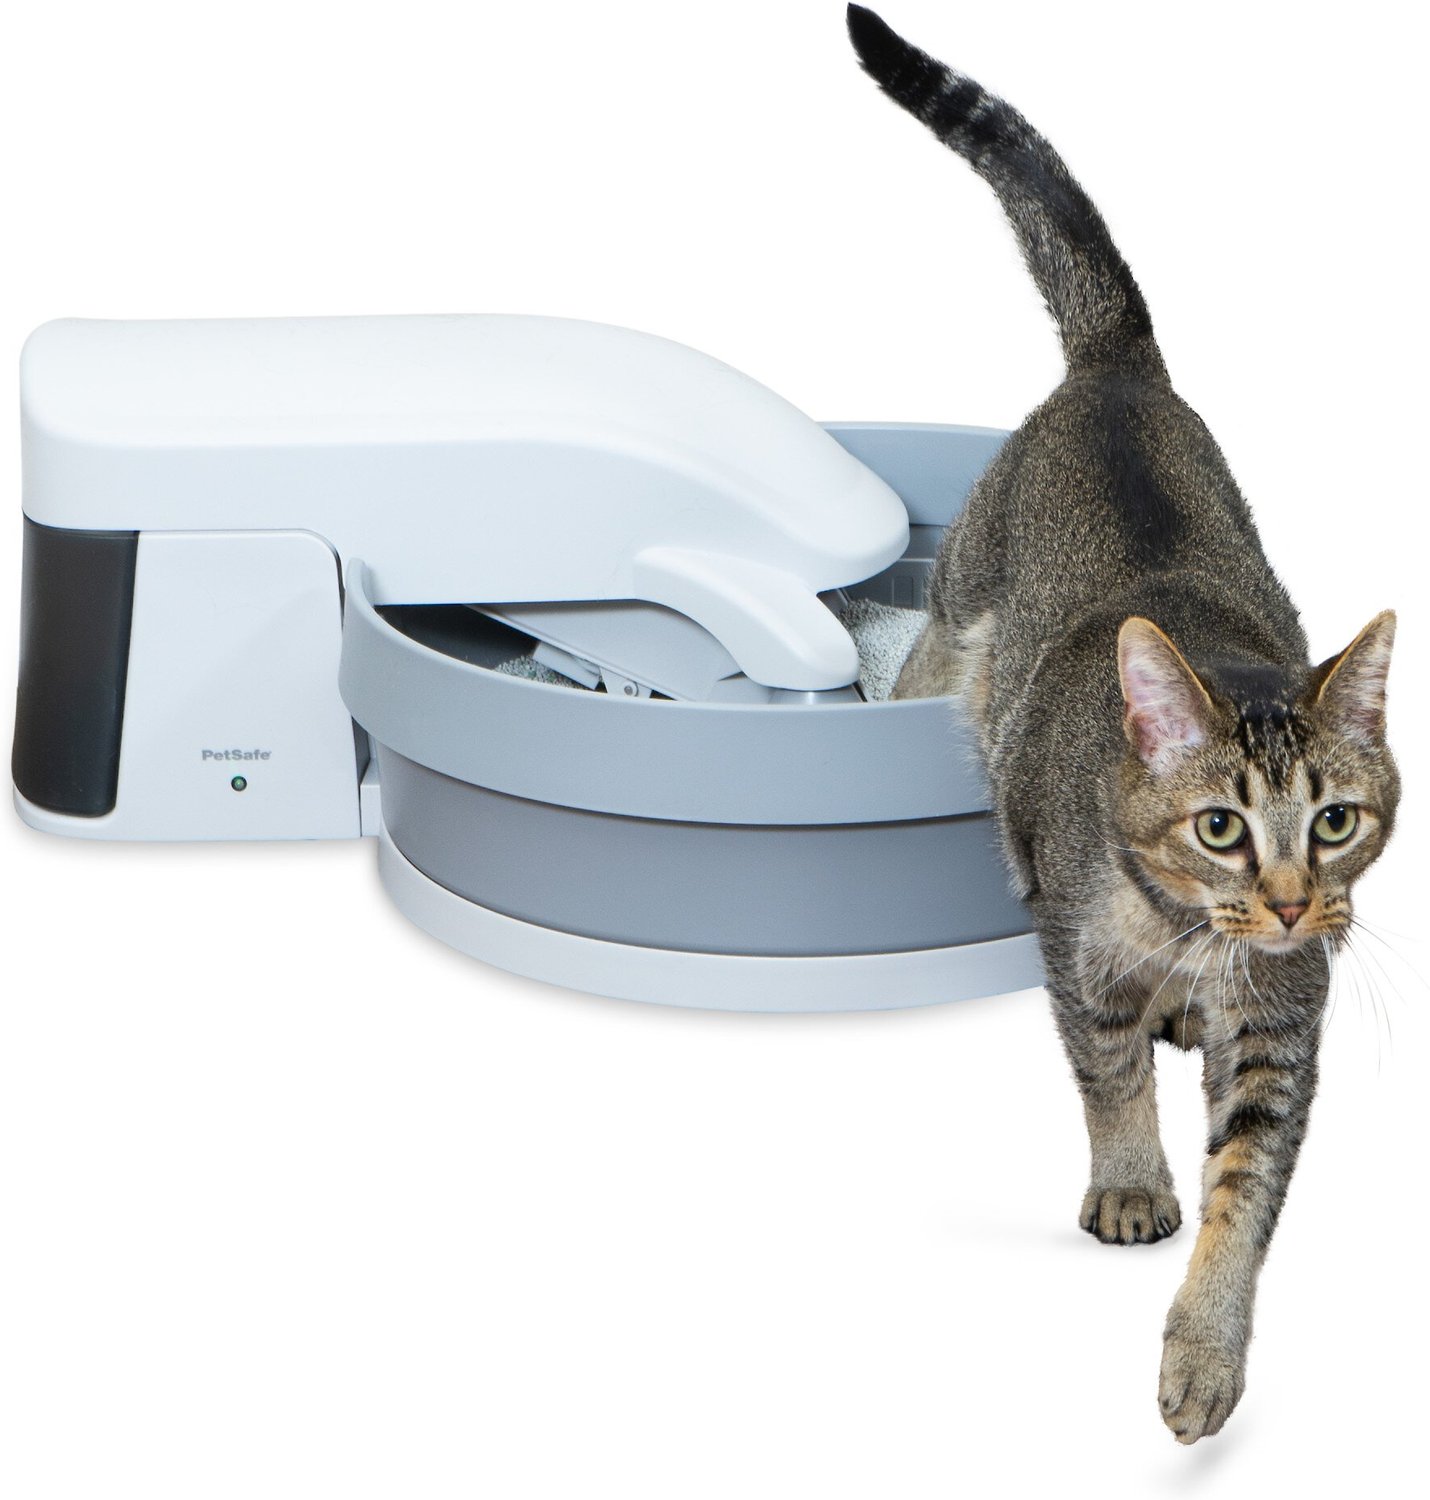 PetSafe Simply Clean Automatic Self-Cleaning Cat Litter Box